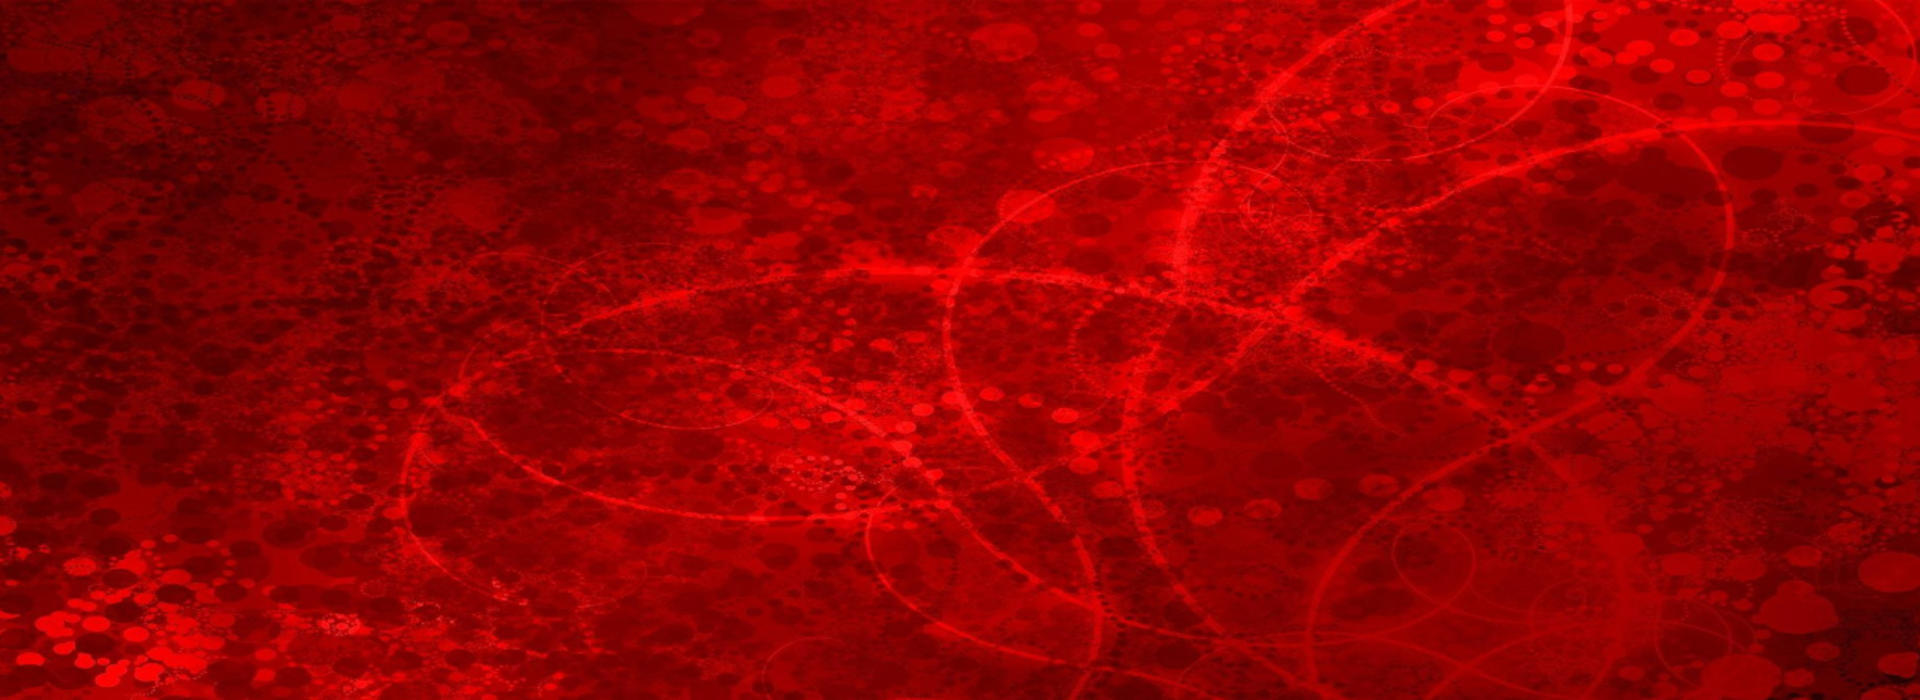 Red image